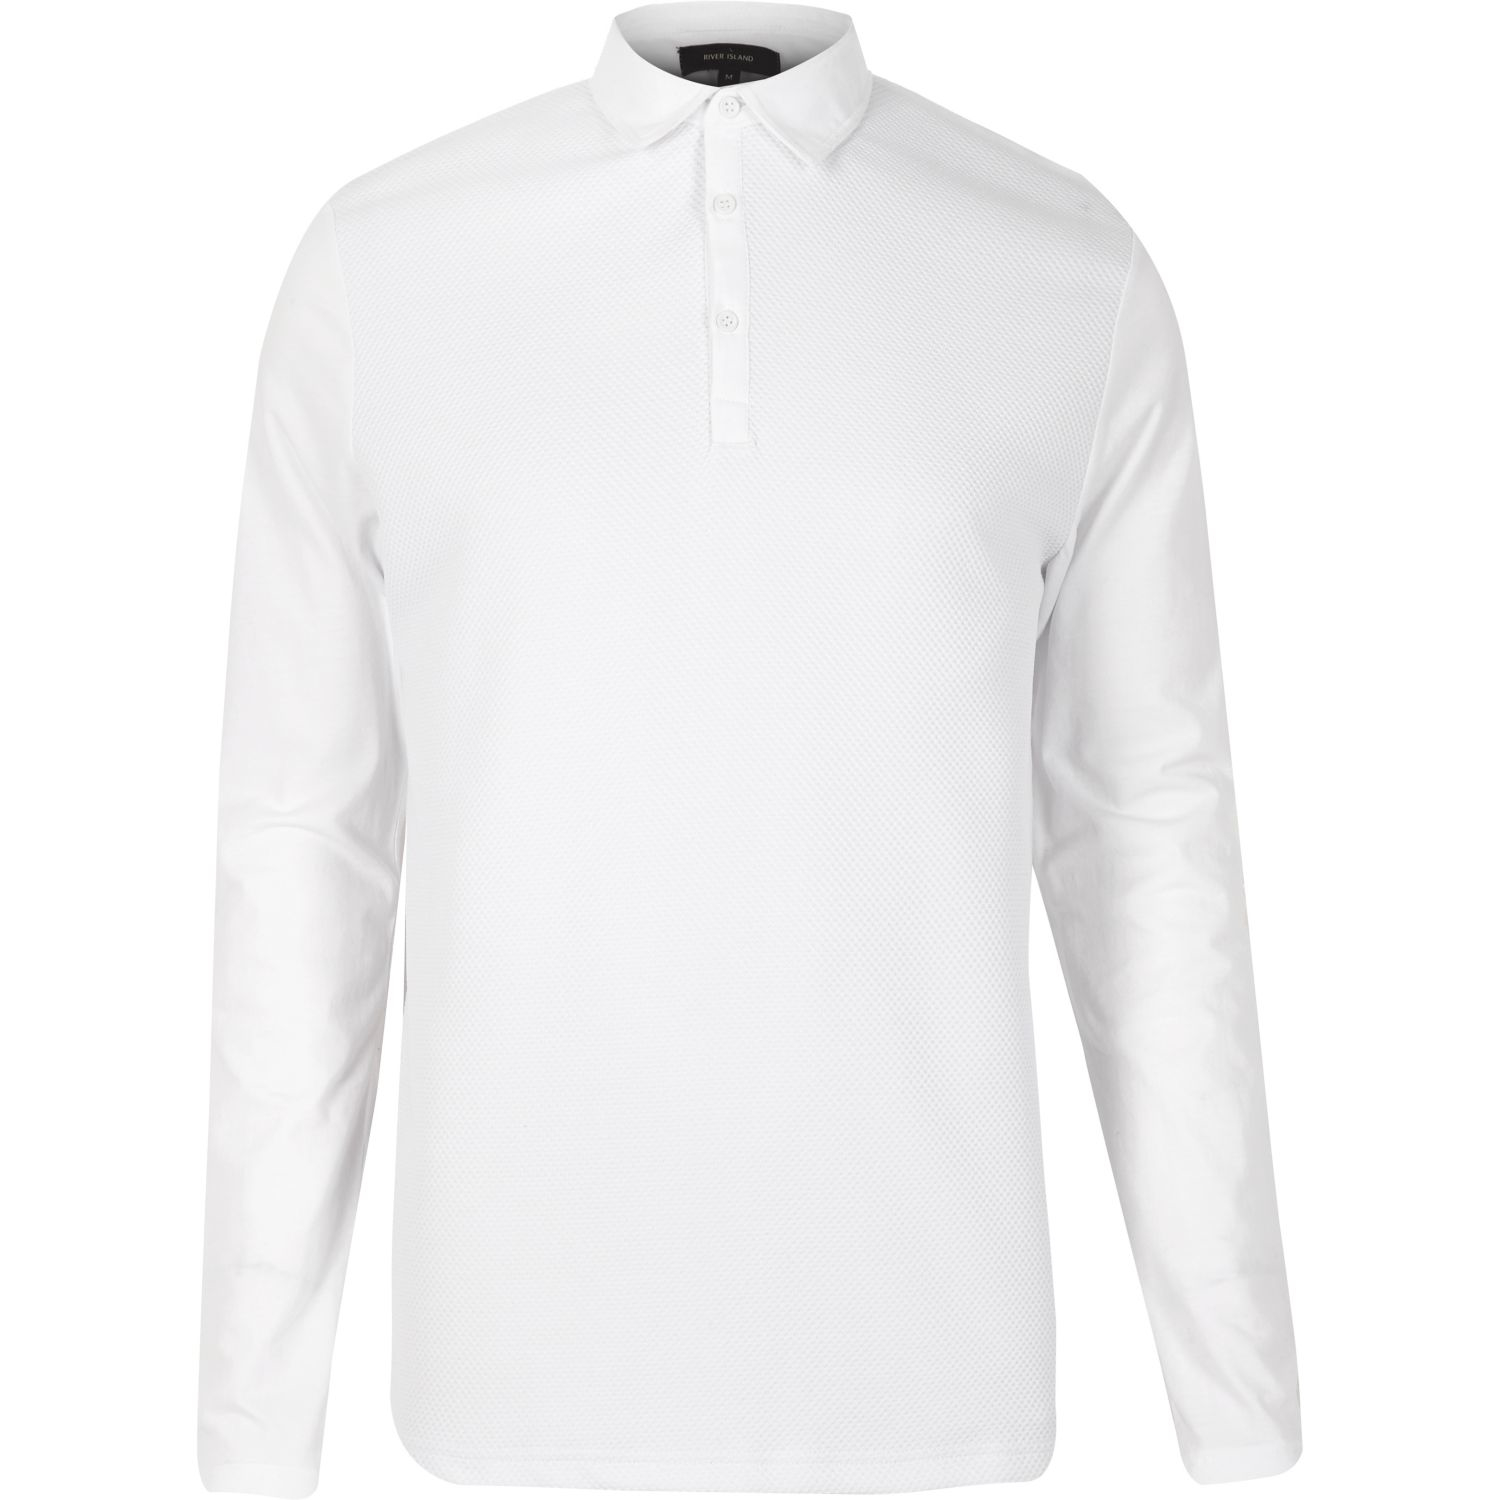 Lyst - River Island White Textured Long Sleeve Polo Shirt in White for Men